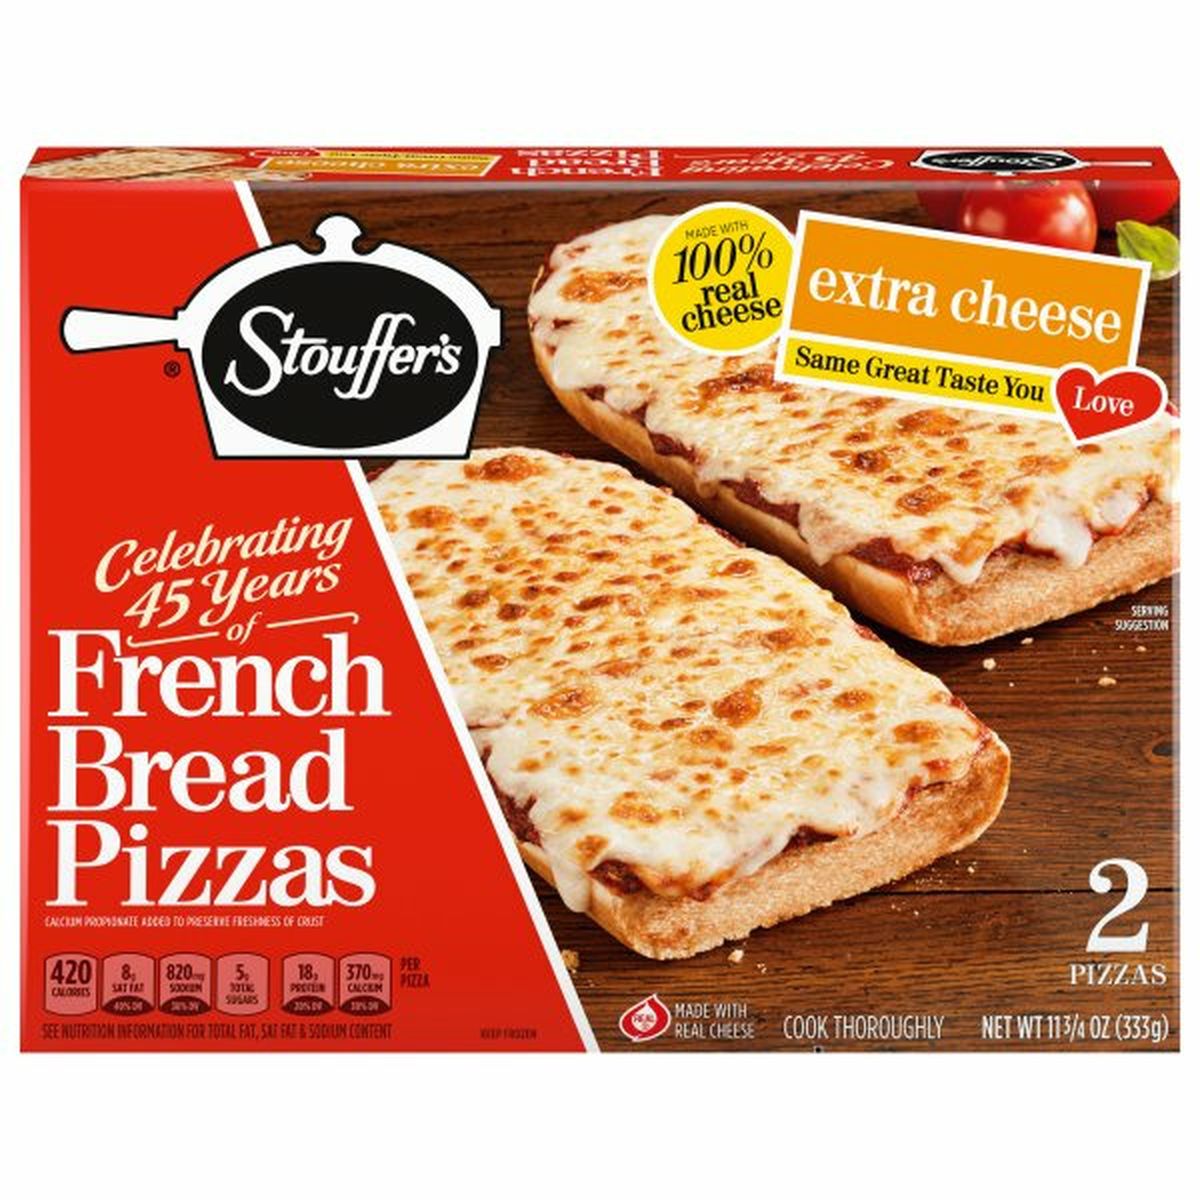 Calories in Stouffer's French Bread Pizzas, Extra Cheese